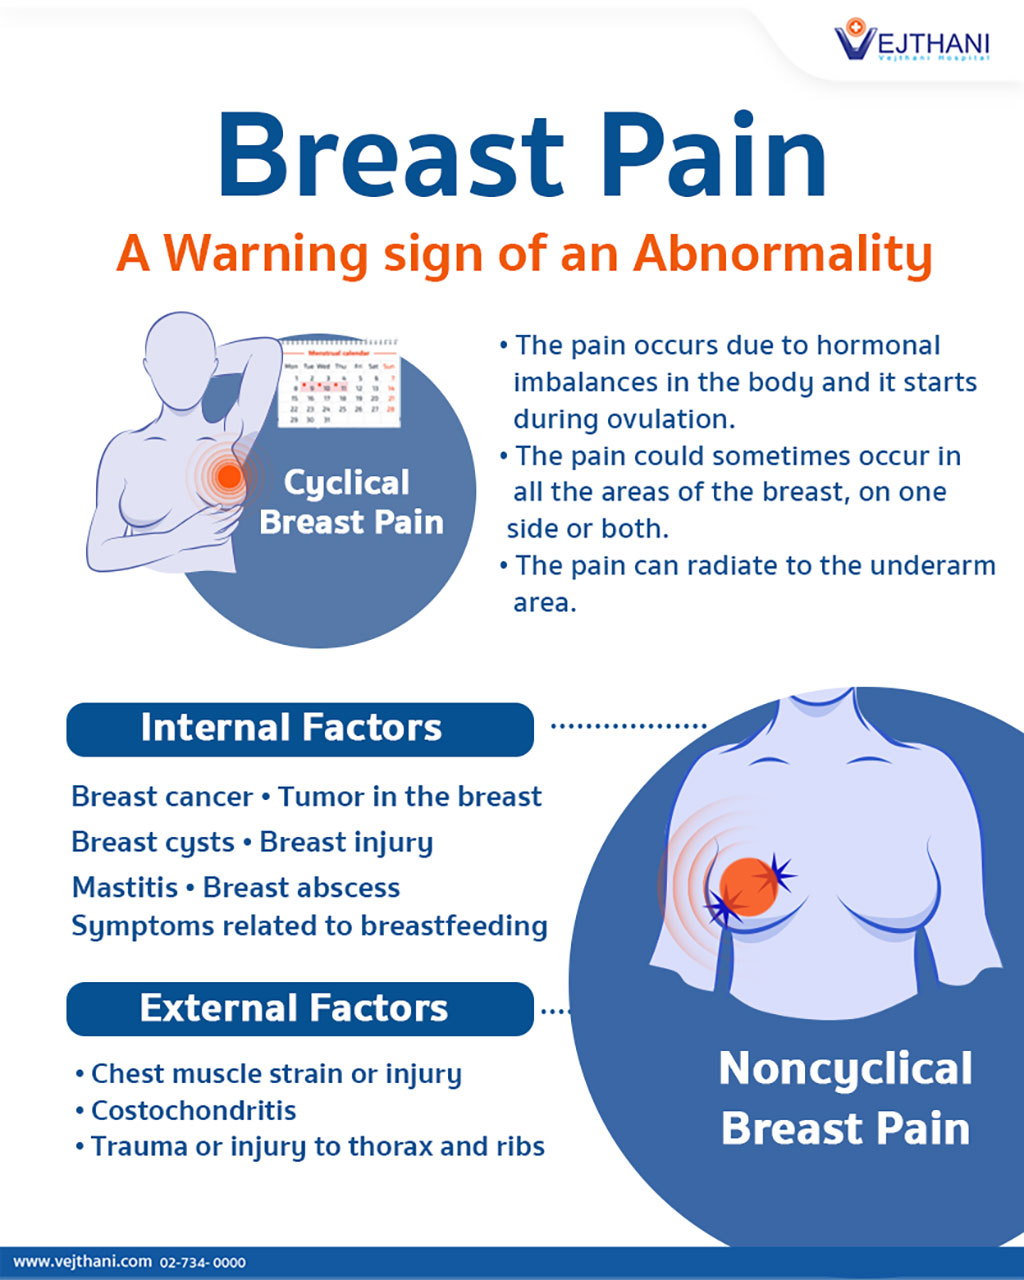 Breast Pain – A Warning sign of an Abnormality